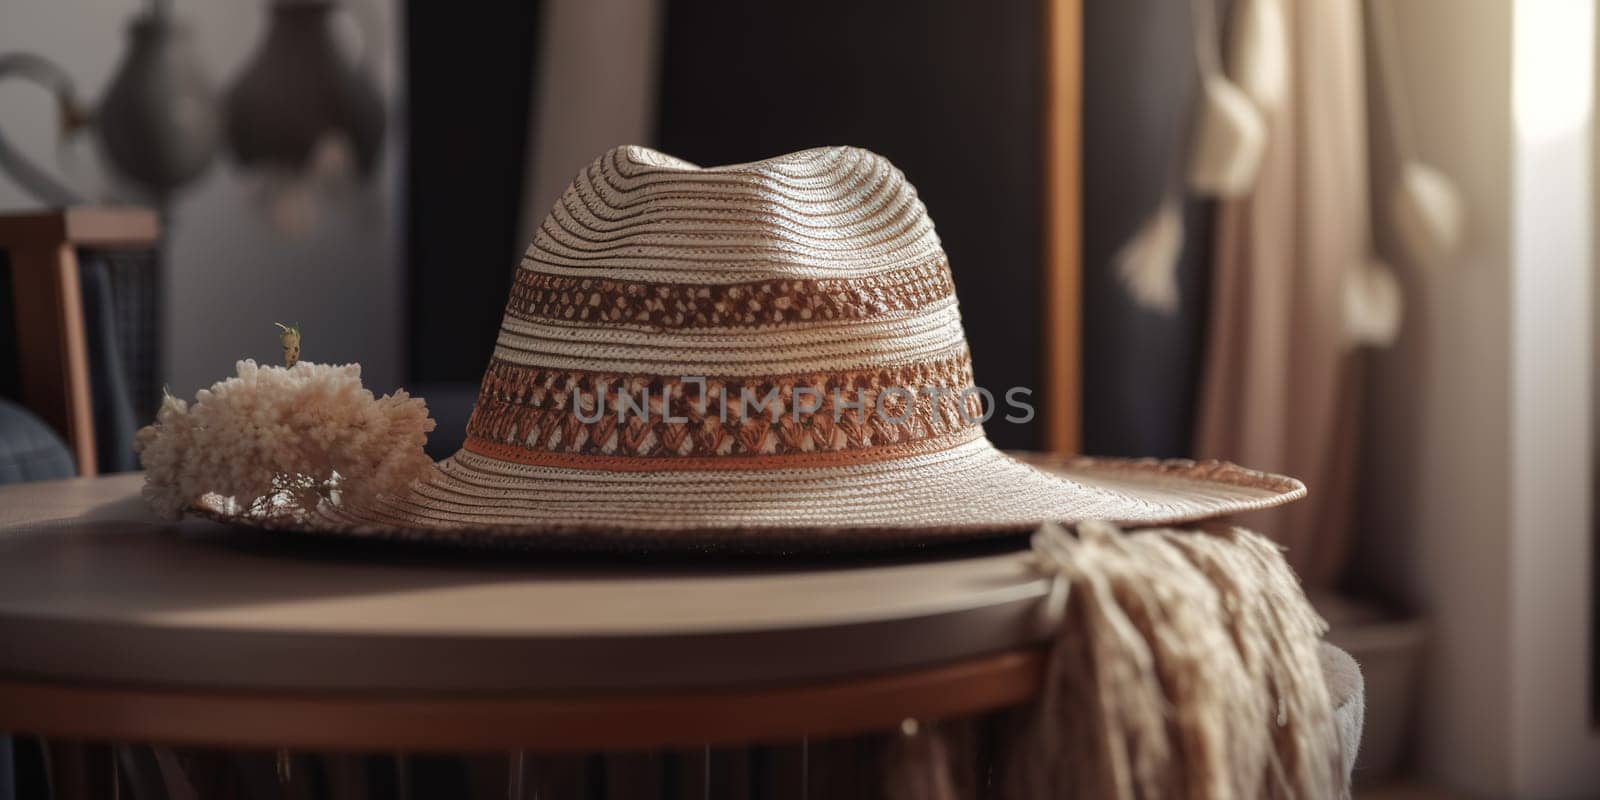 Stylish straw women's hat on the table. by tan4ikk1